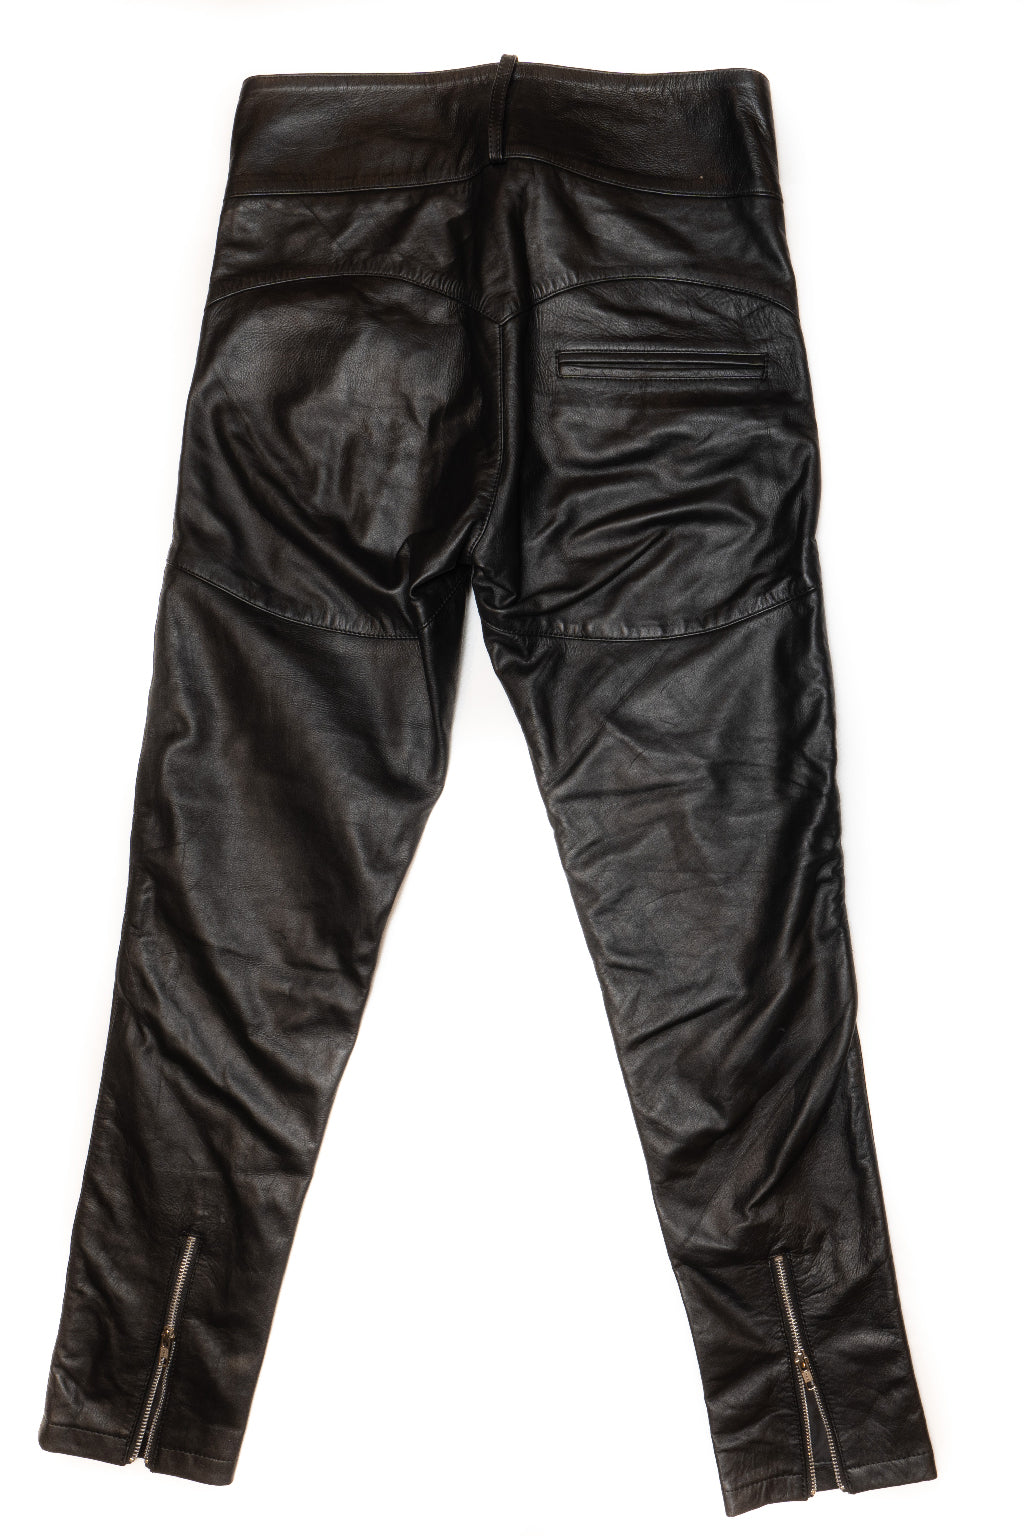 https://cleaverculture.com/cdn/shop/files/1-buy-womens-pants-cleaver-culture-black-leather-online-in-canada-mexico-usa-back.jpg?v=1693347897&width=1445